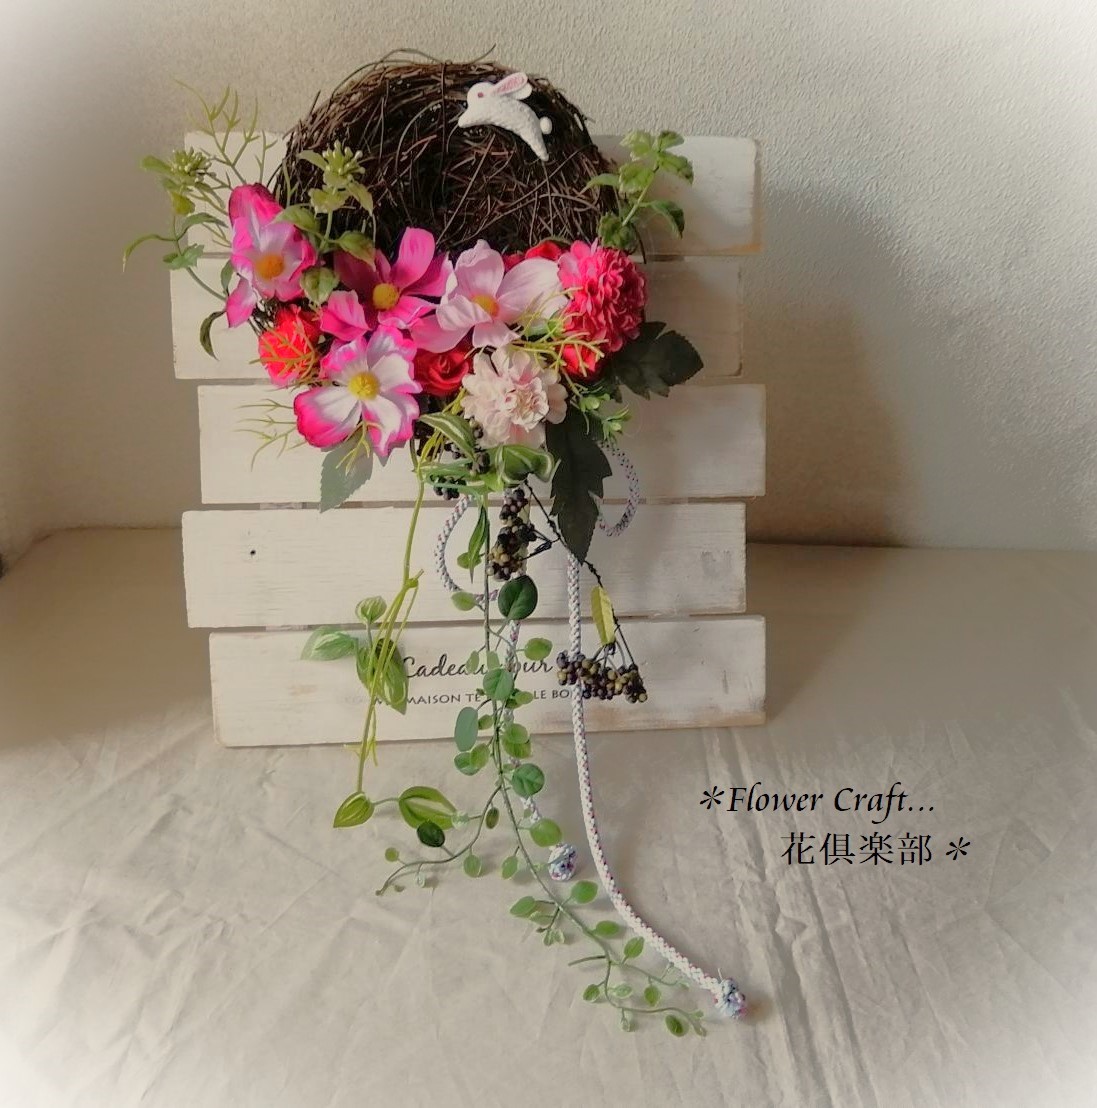 Cosmos and crepe rabbit wall hanging ◆ Interior decoration, wall hanging ◆ Artificial flowers, gifts, entrance, housewarming gifts, wedding gifts, Handcraft, Handicrafts, Art Flower, Pressed flowers, lease